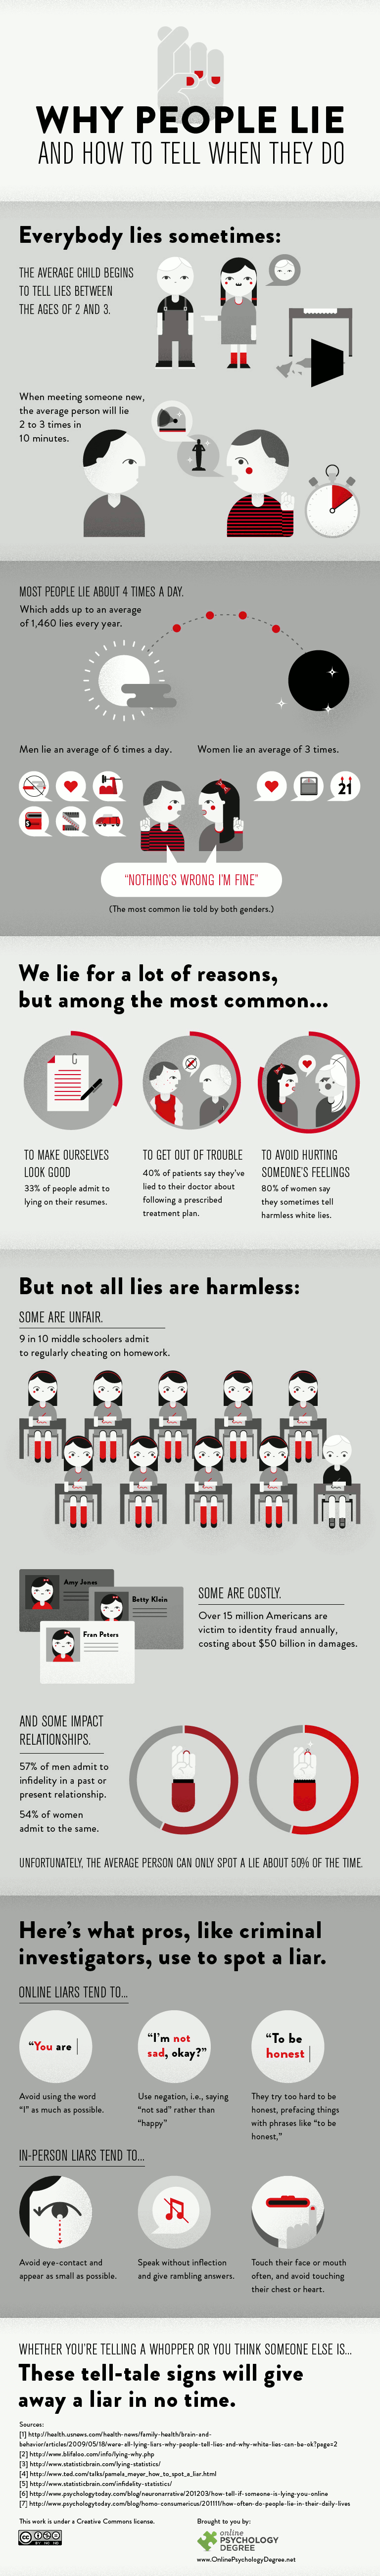 Why People Lie And How To Tell When They Do